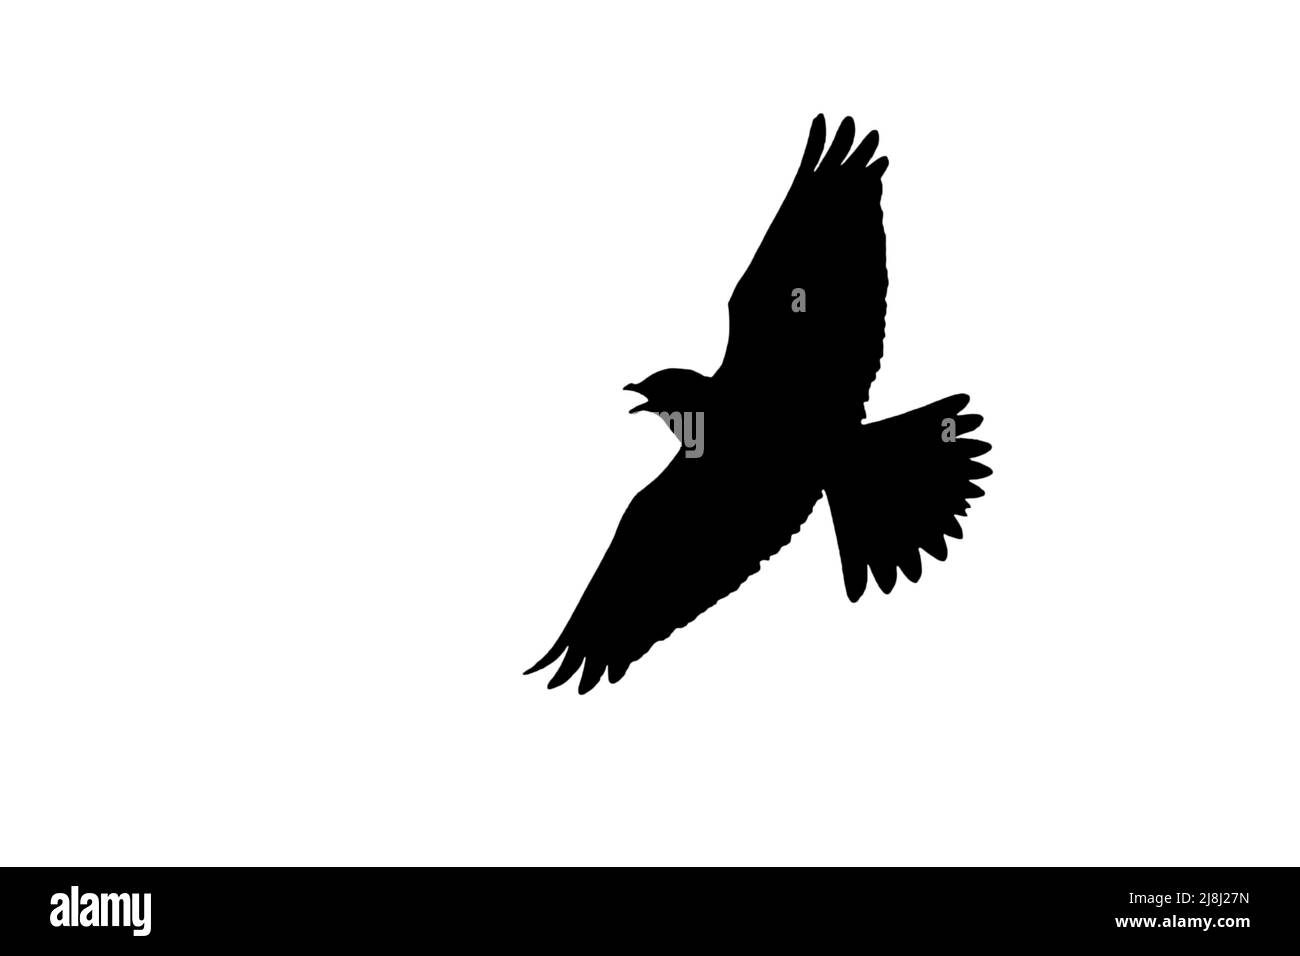 Silhouette of Eurasian skylark (Alauda arvensis) in flight outlined against white background to show wings, head and tail shapes Stock Photo